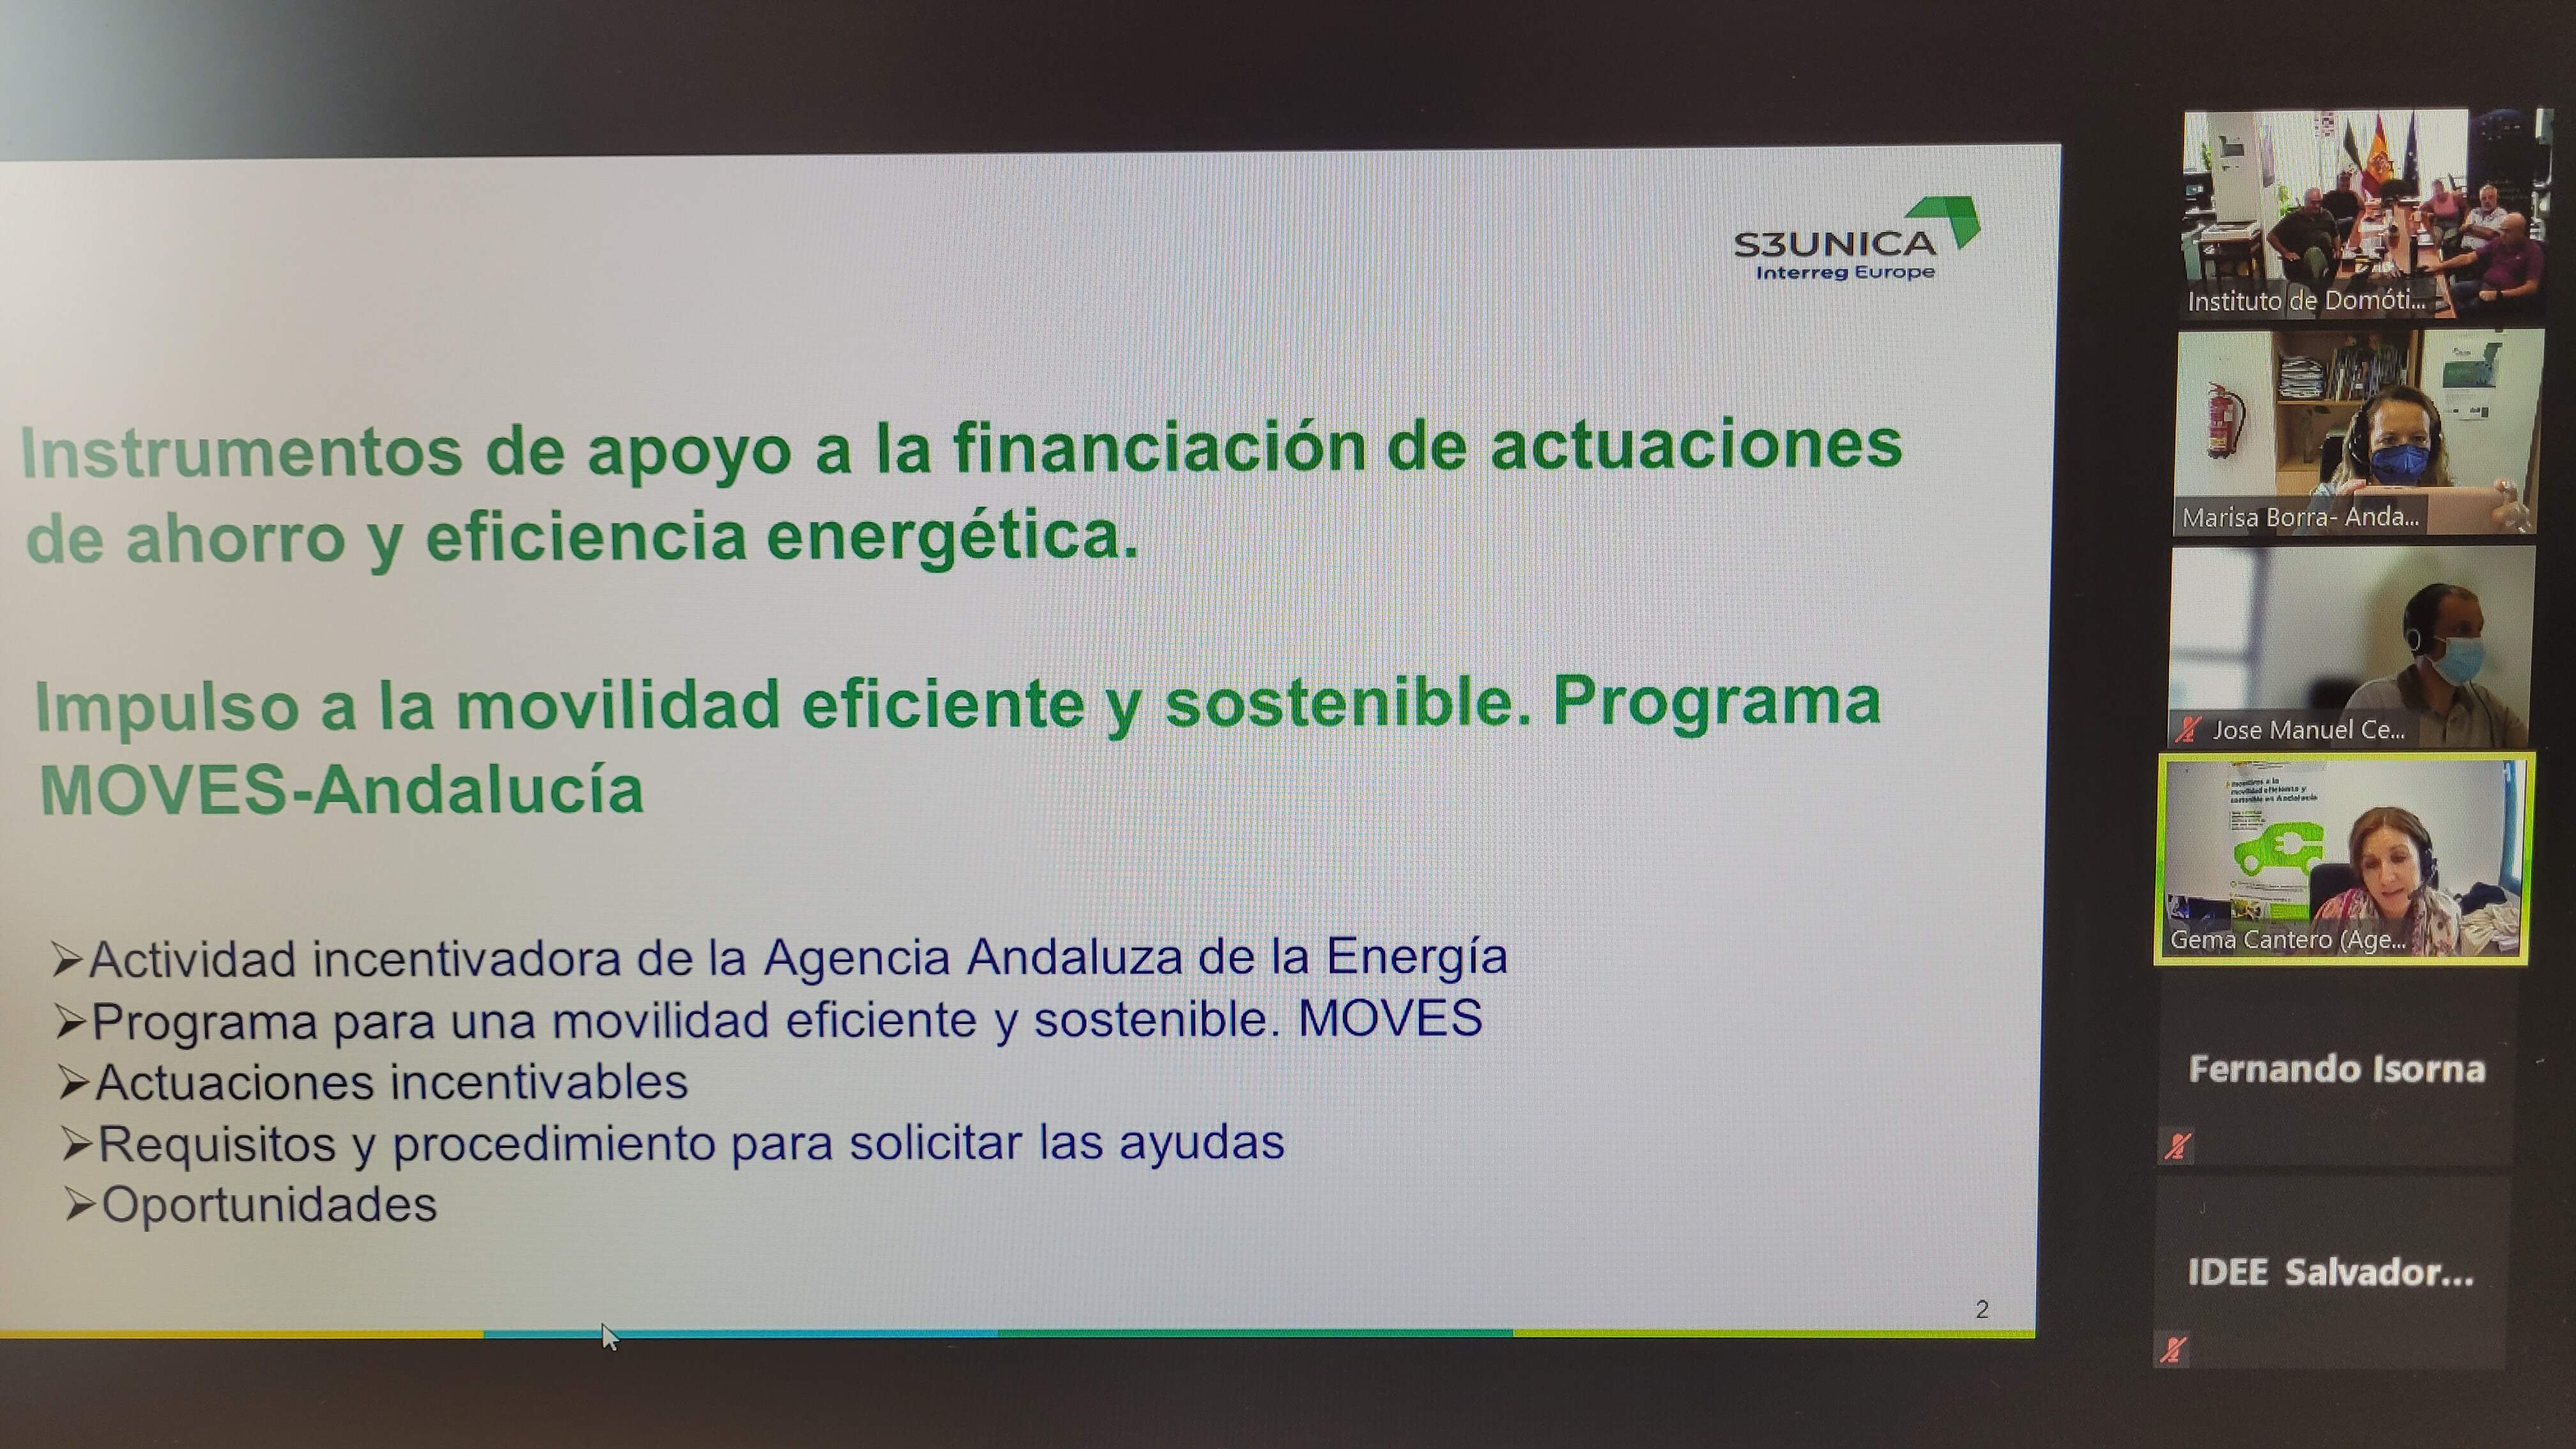 New stakeholder meeting for Andalusian partners